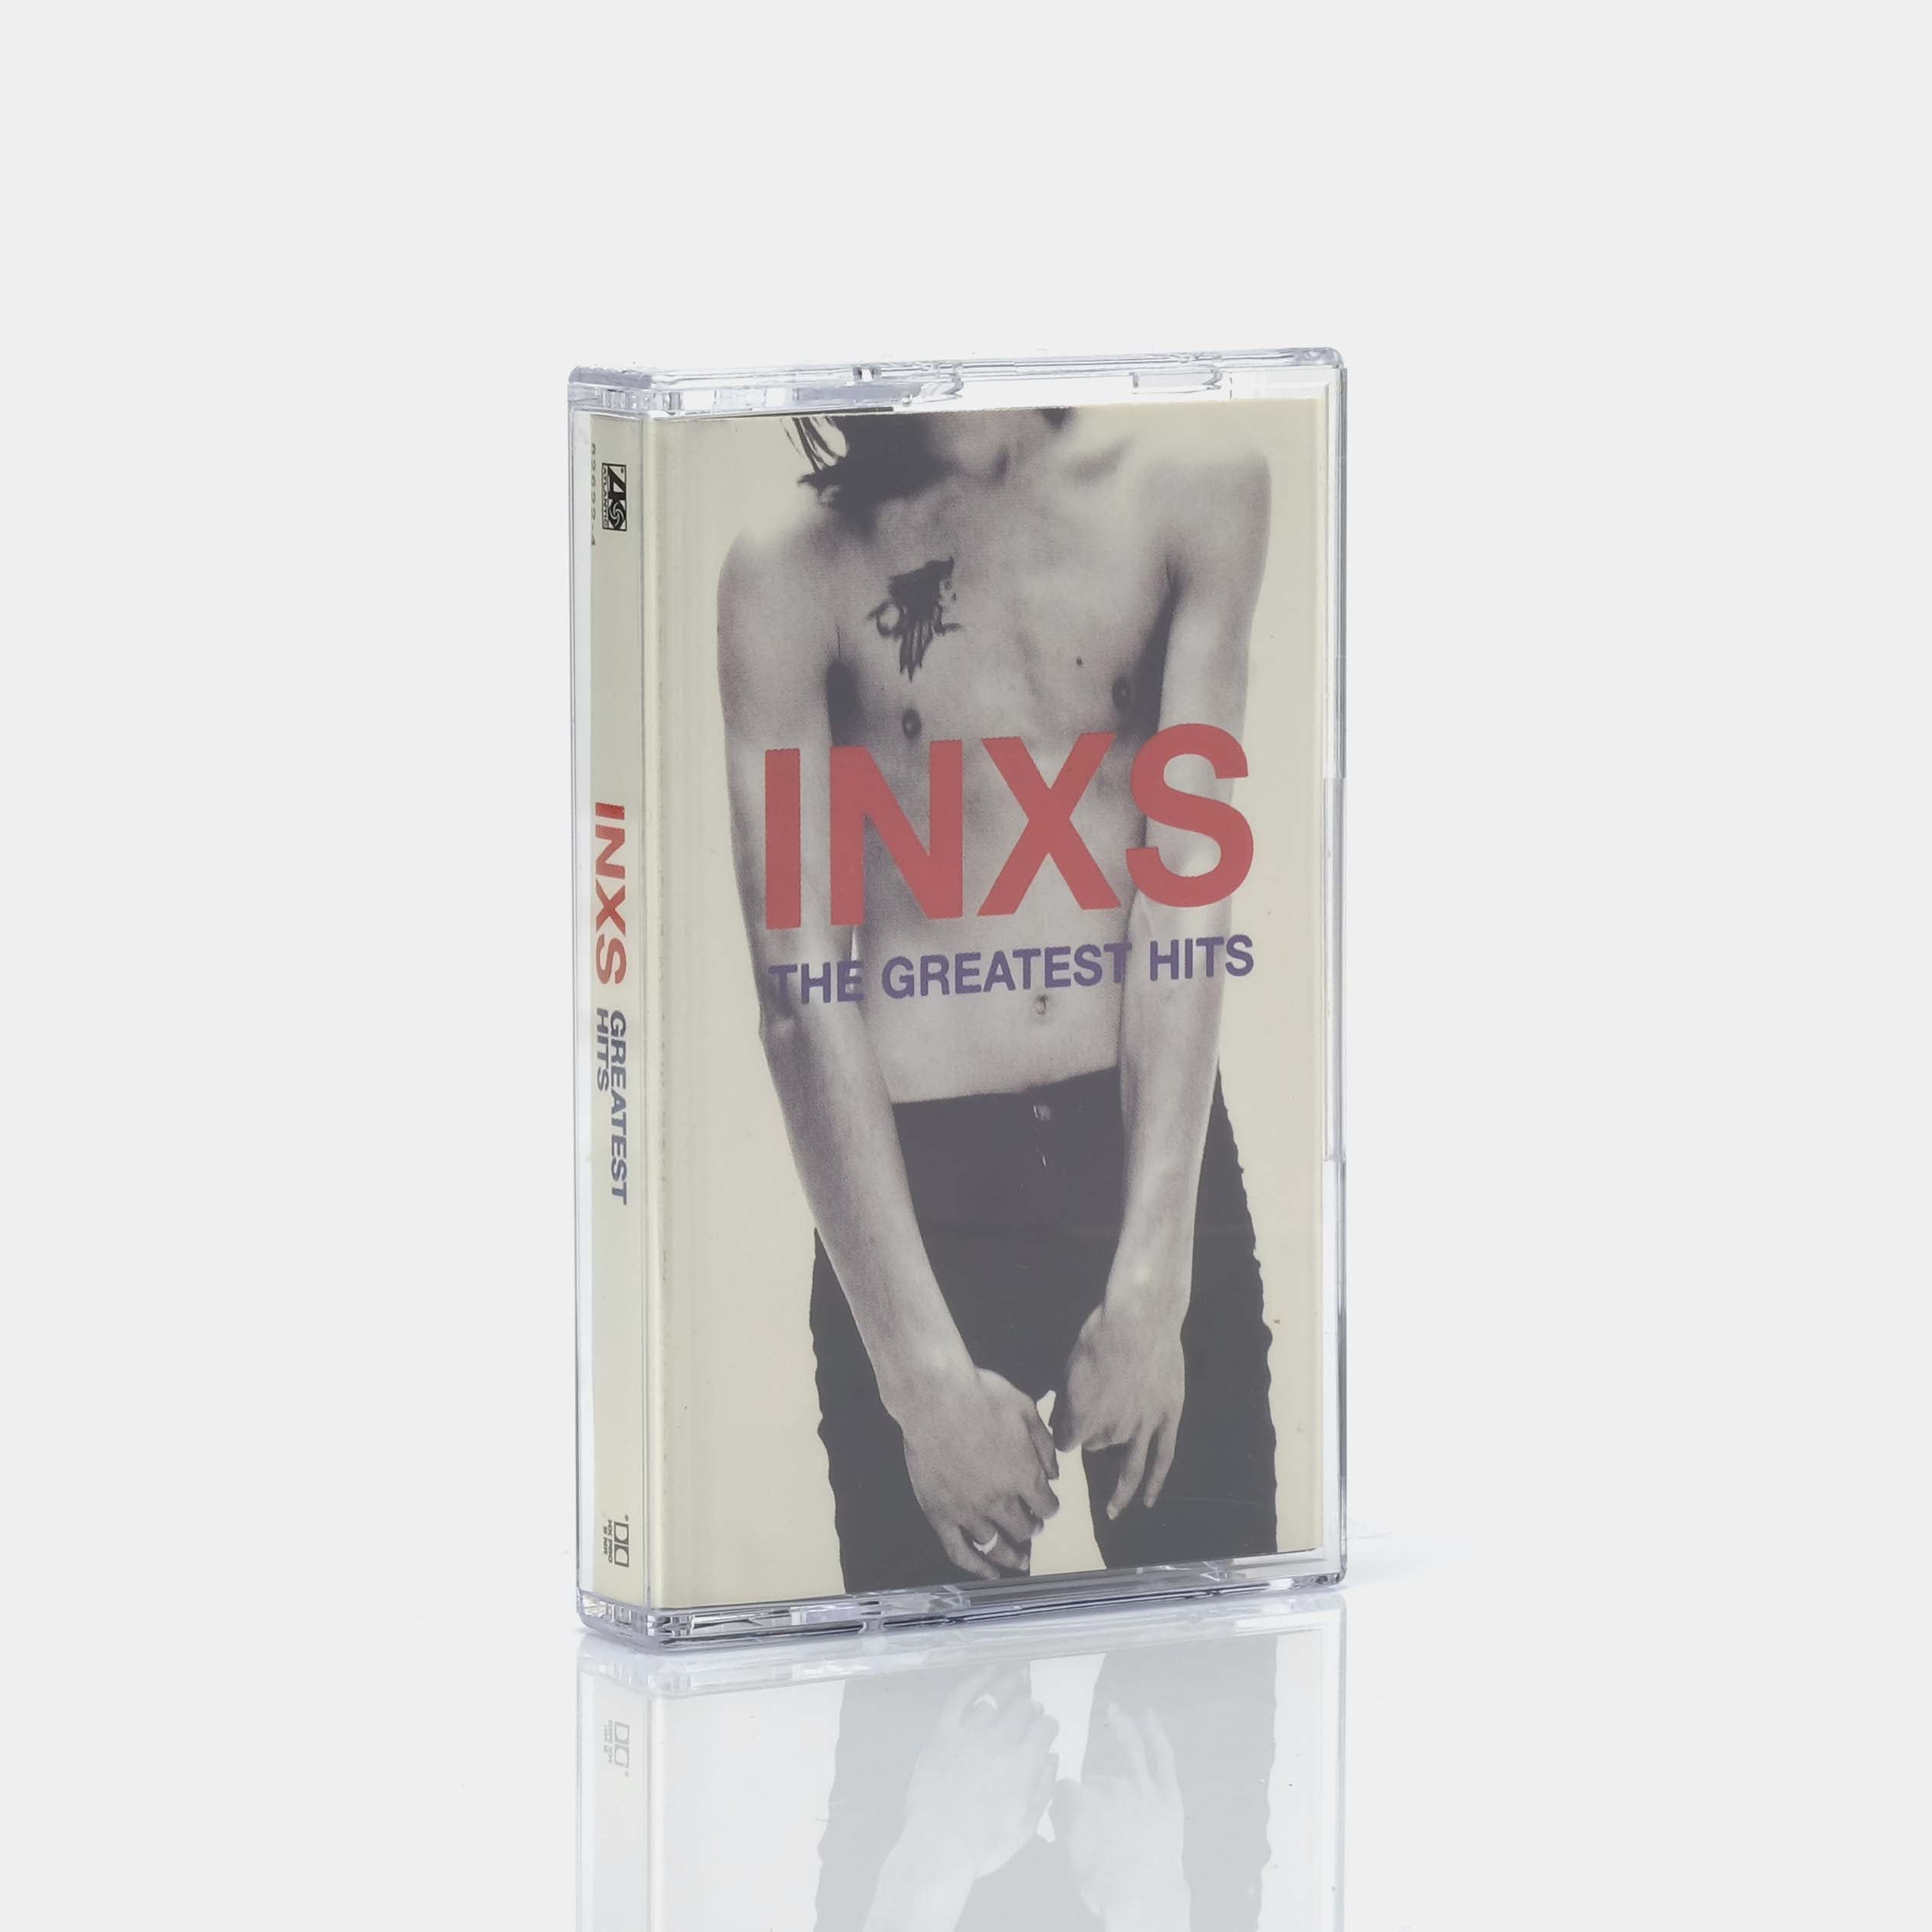 INXS - The Greatest Hits Cassette Tape